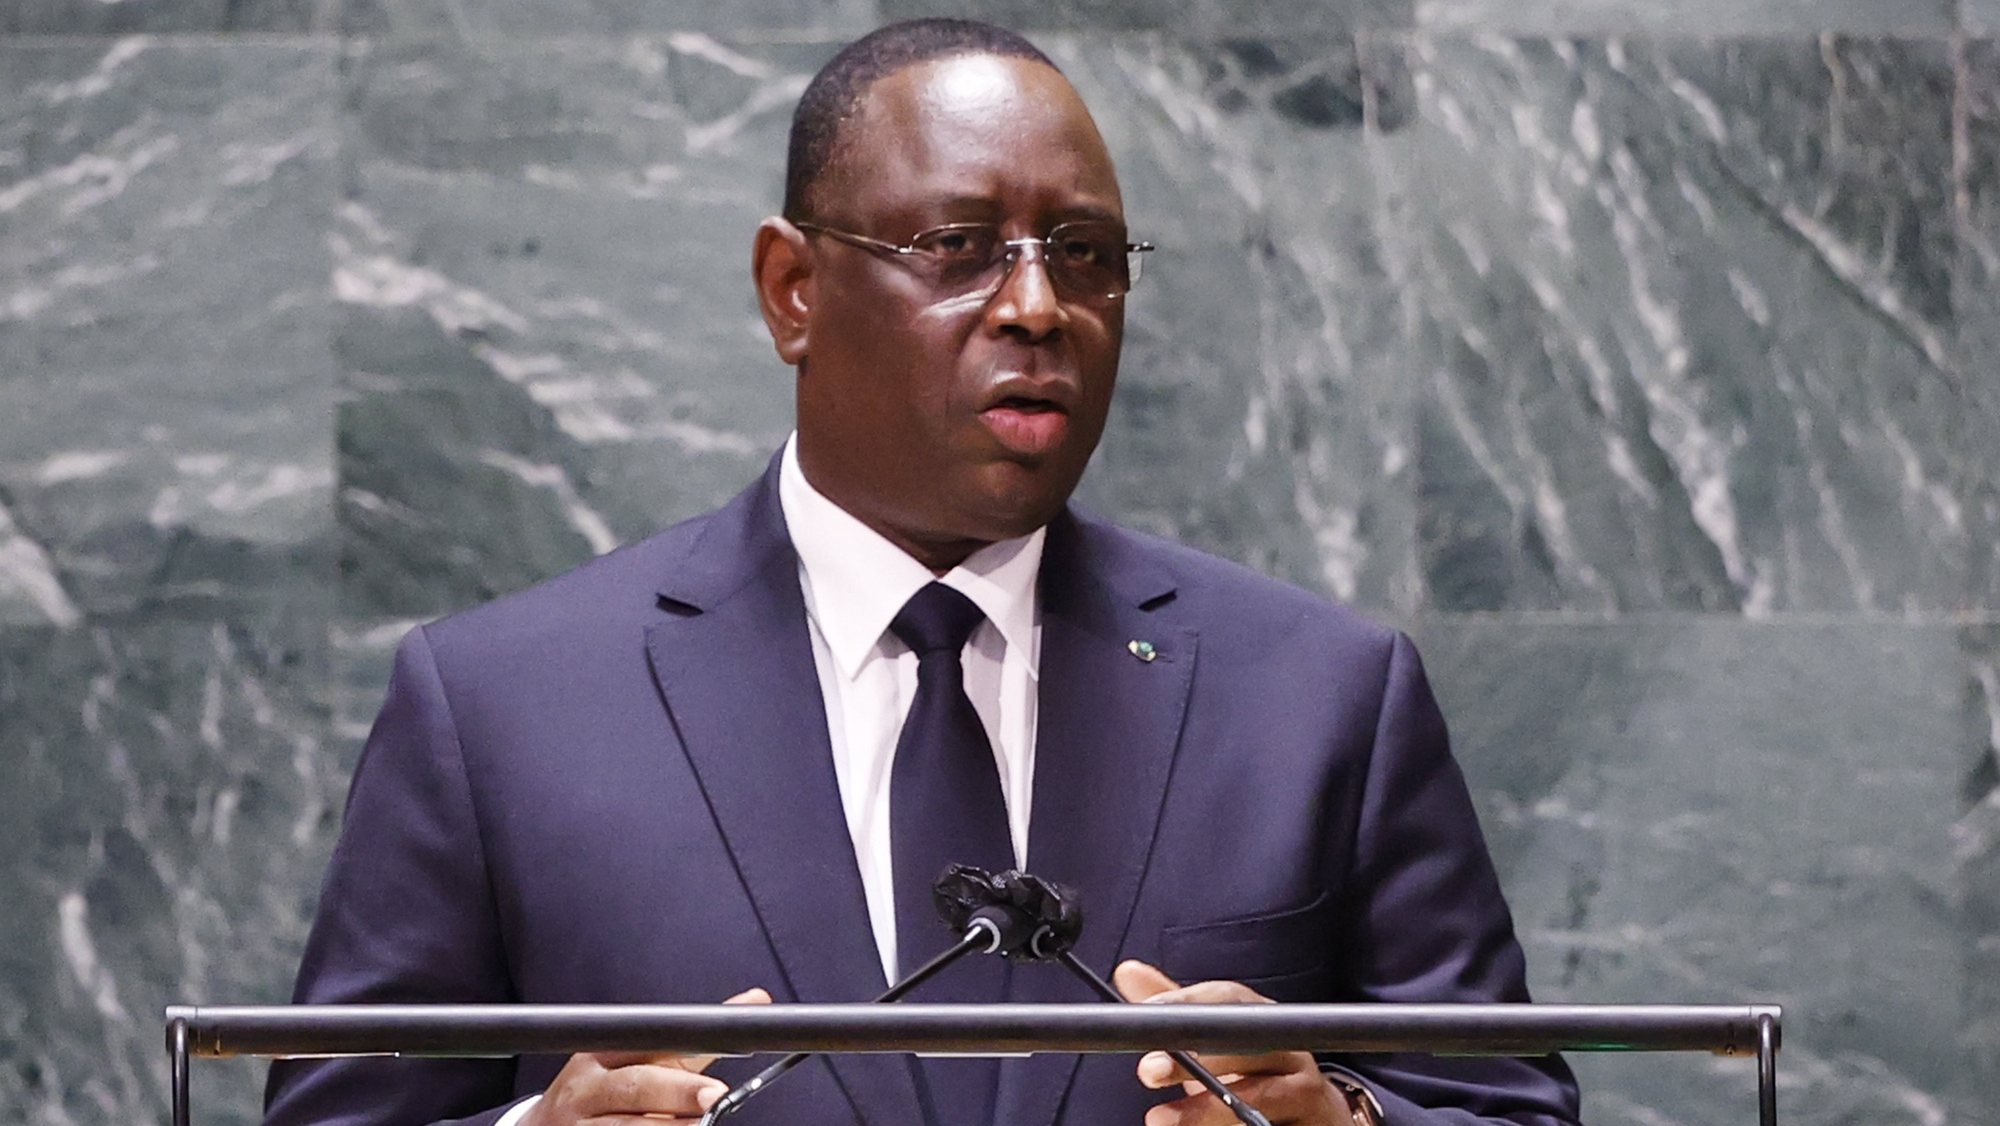 epa09485767 President of Senegal, Macky Sall, speaks at the UN General Assembly 76th session General Debate in UN General Assembly Hall at the United Nations Headquarters, in New York City, New York, USA, 24 September 2021.  EPA/JOHN ANGELILLO / POOL